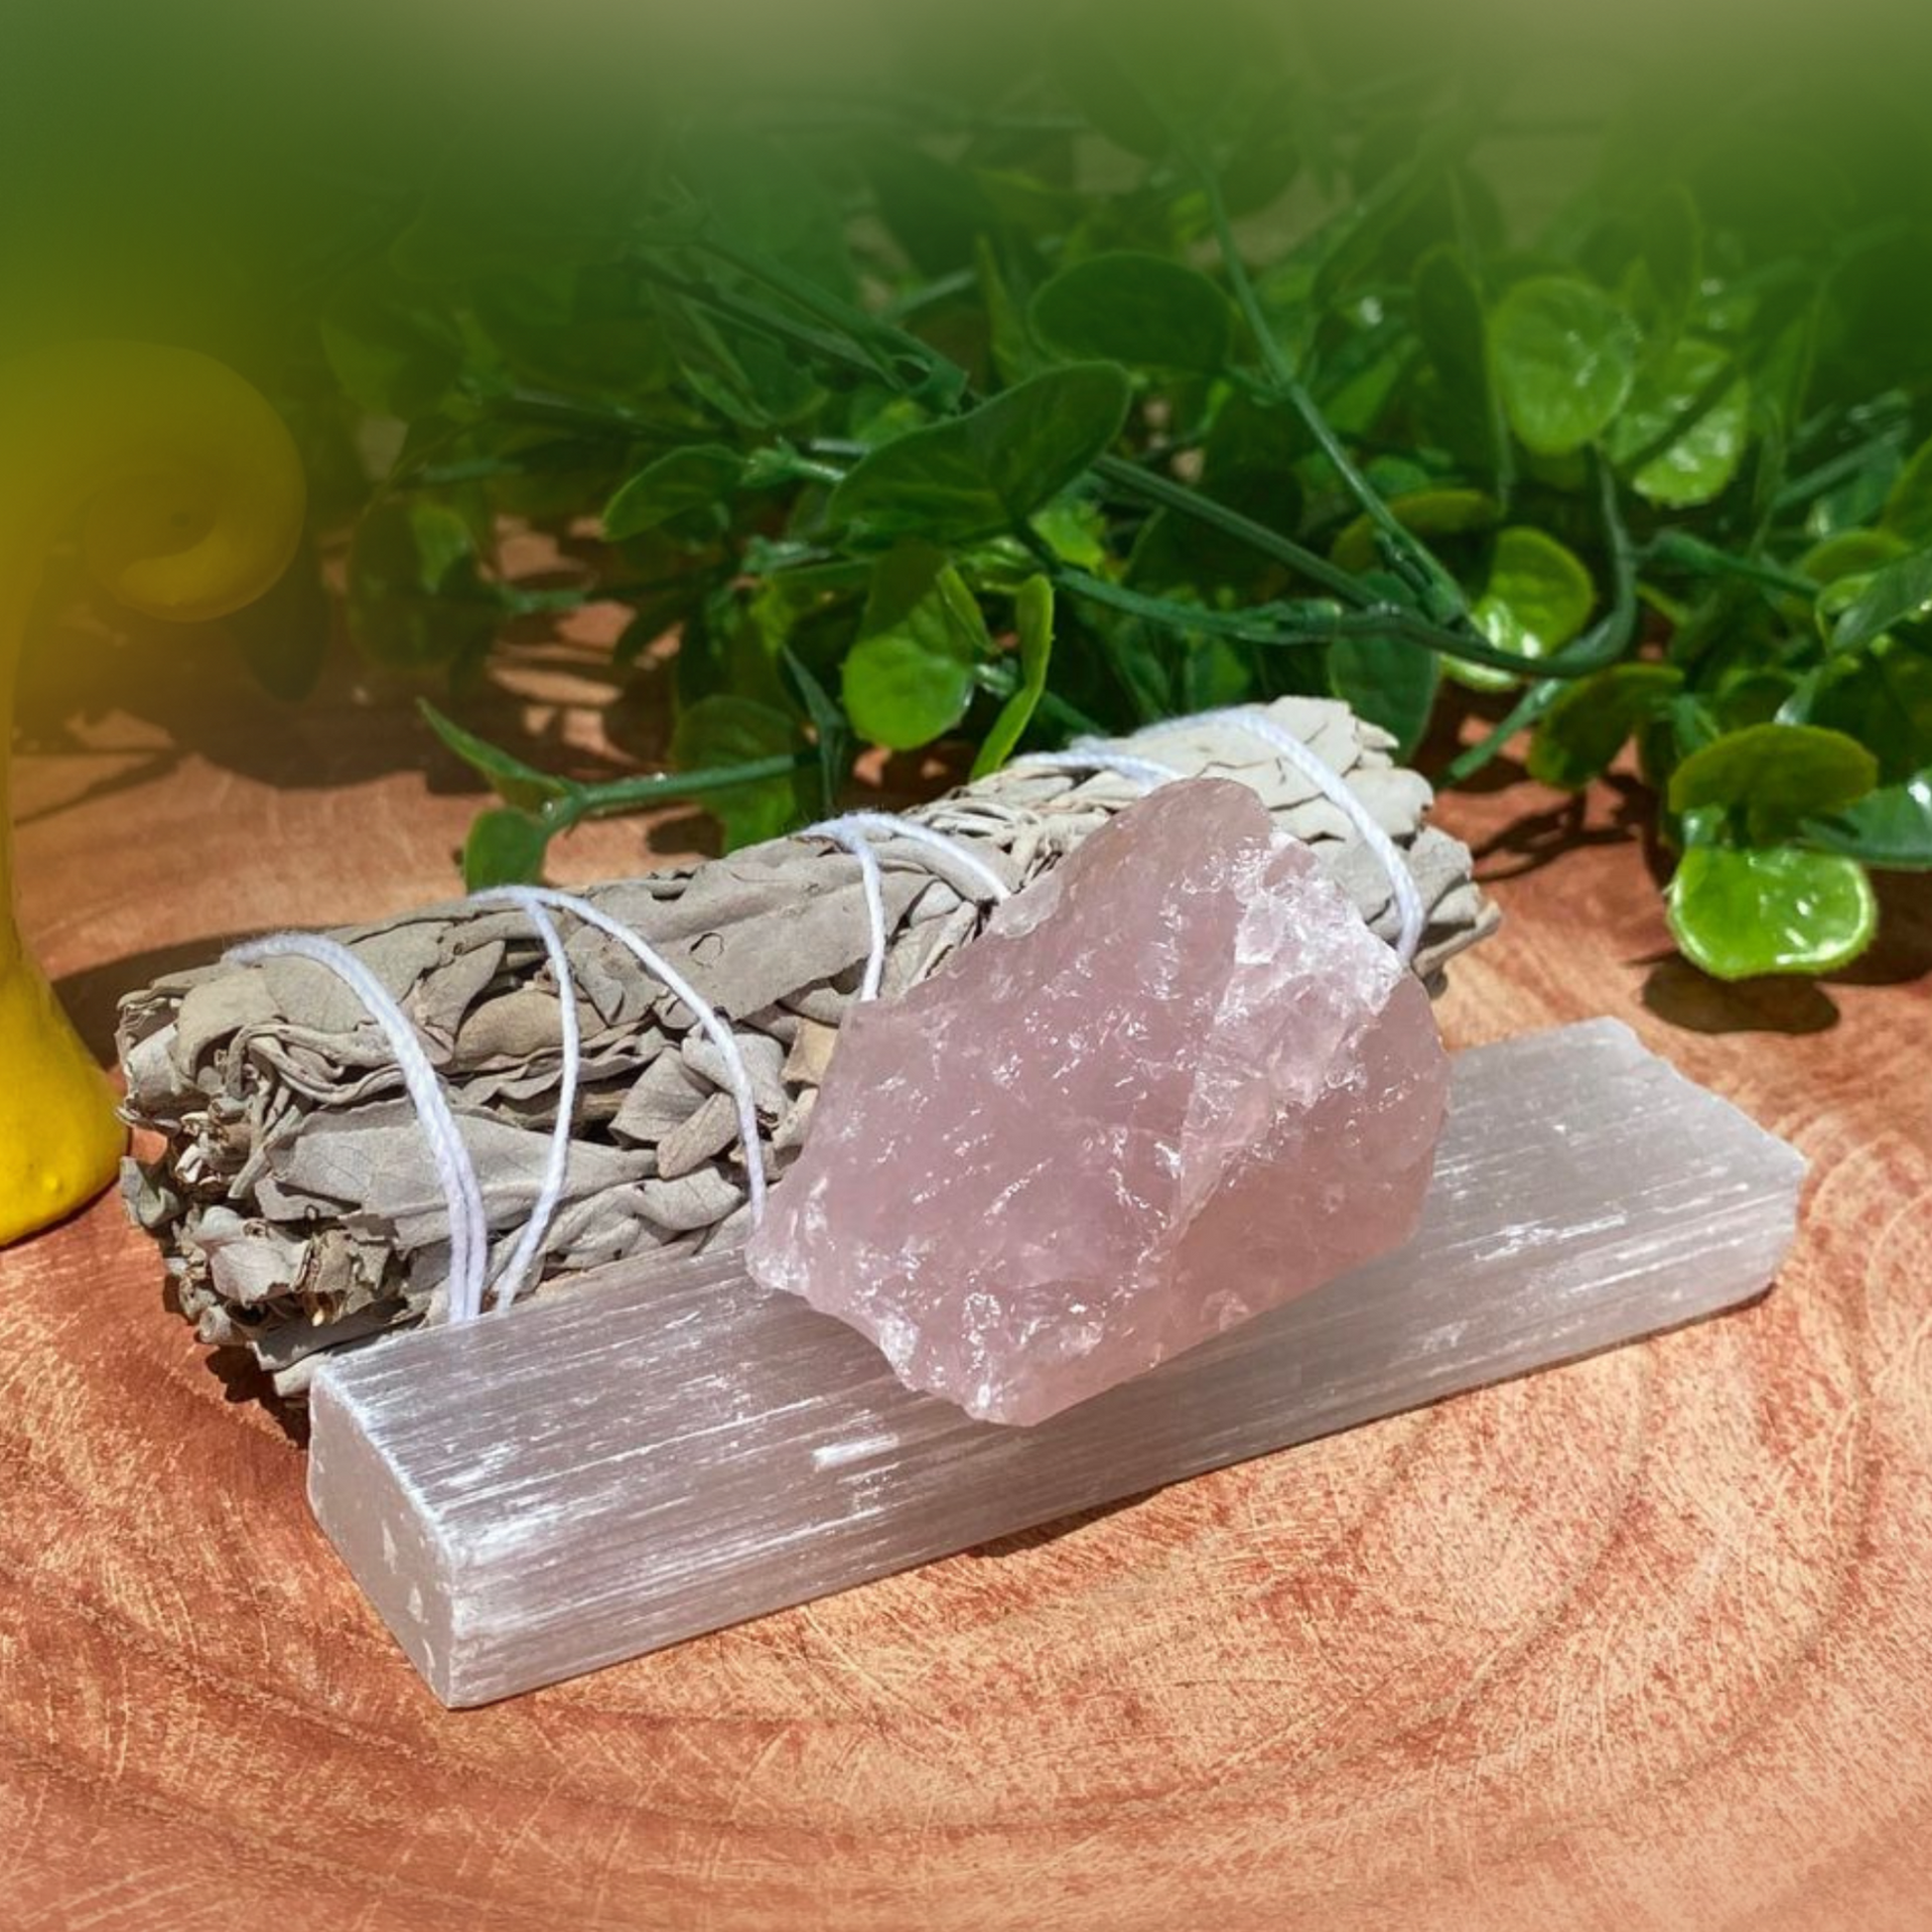 Heart Cleansing Bundle with Sage, Raw Rose Quartz and Raw Selenite.